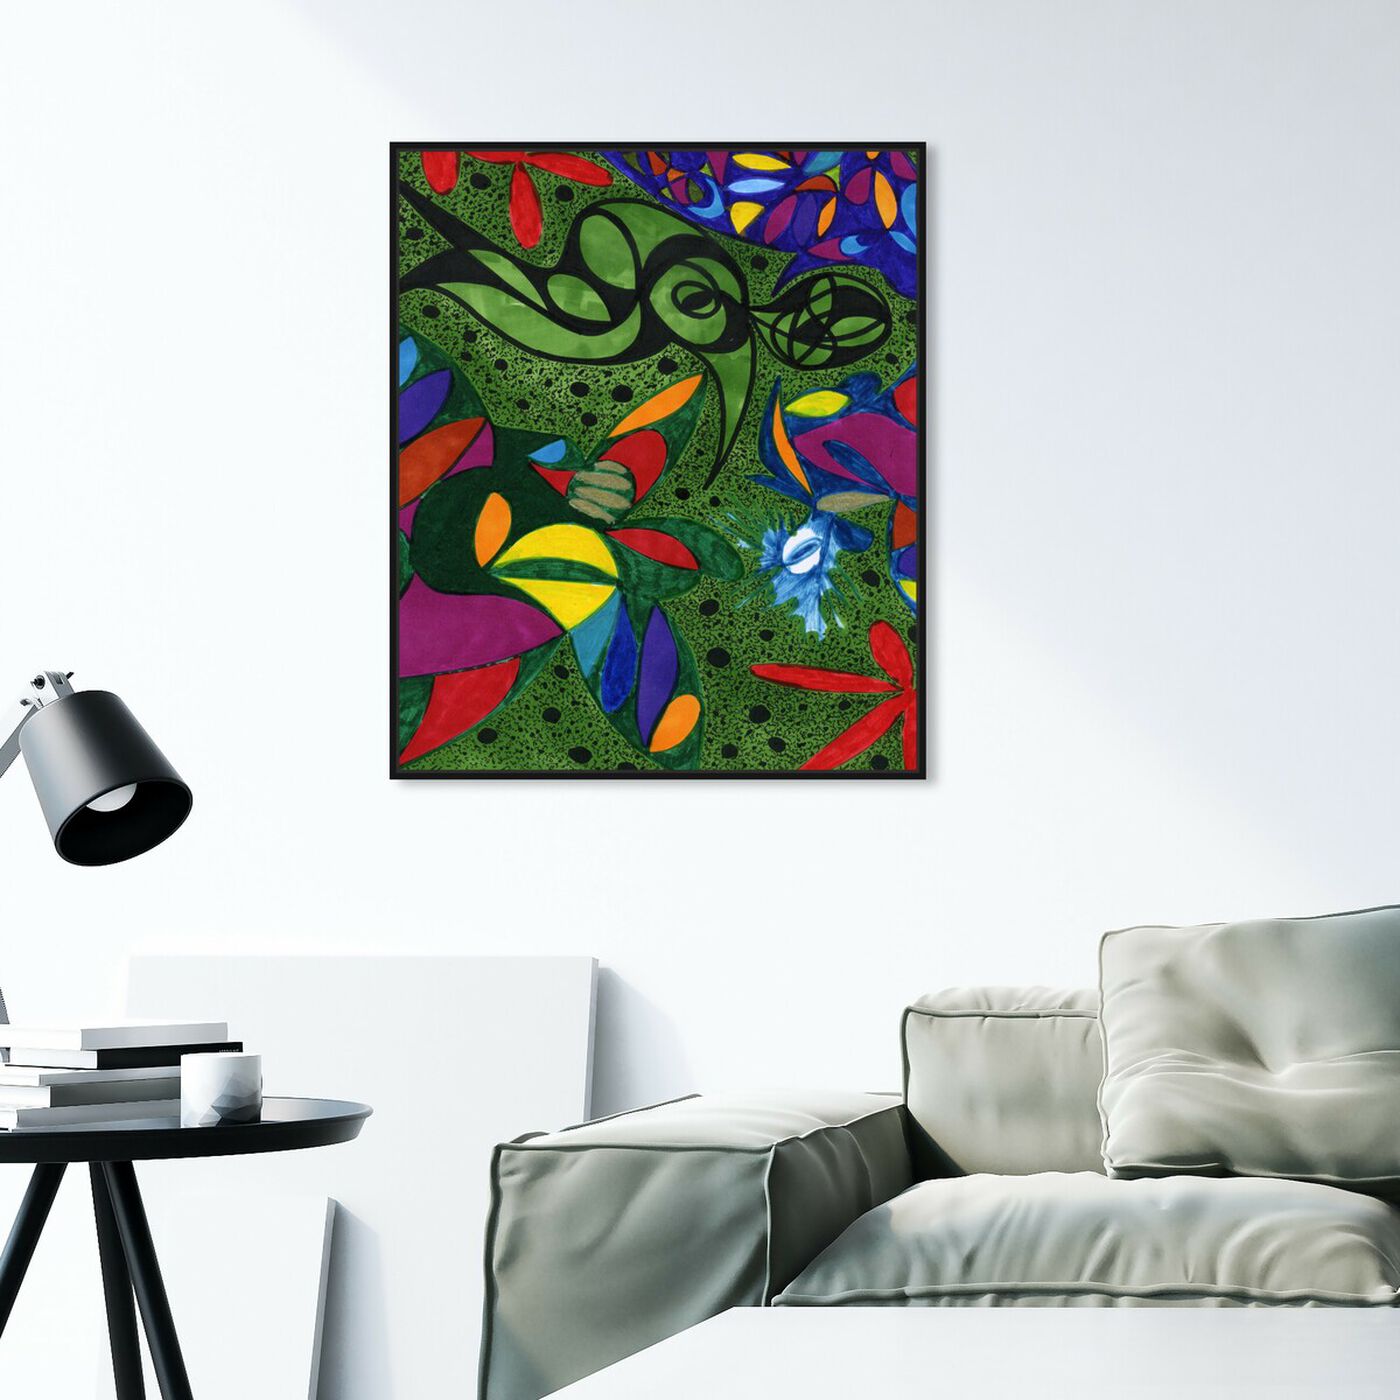 Hanging view of Beneath The Mangroves featuring abstract and shapes art.